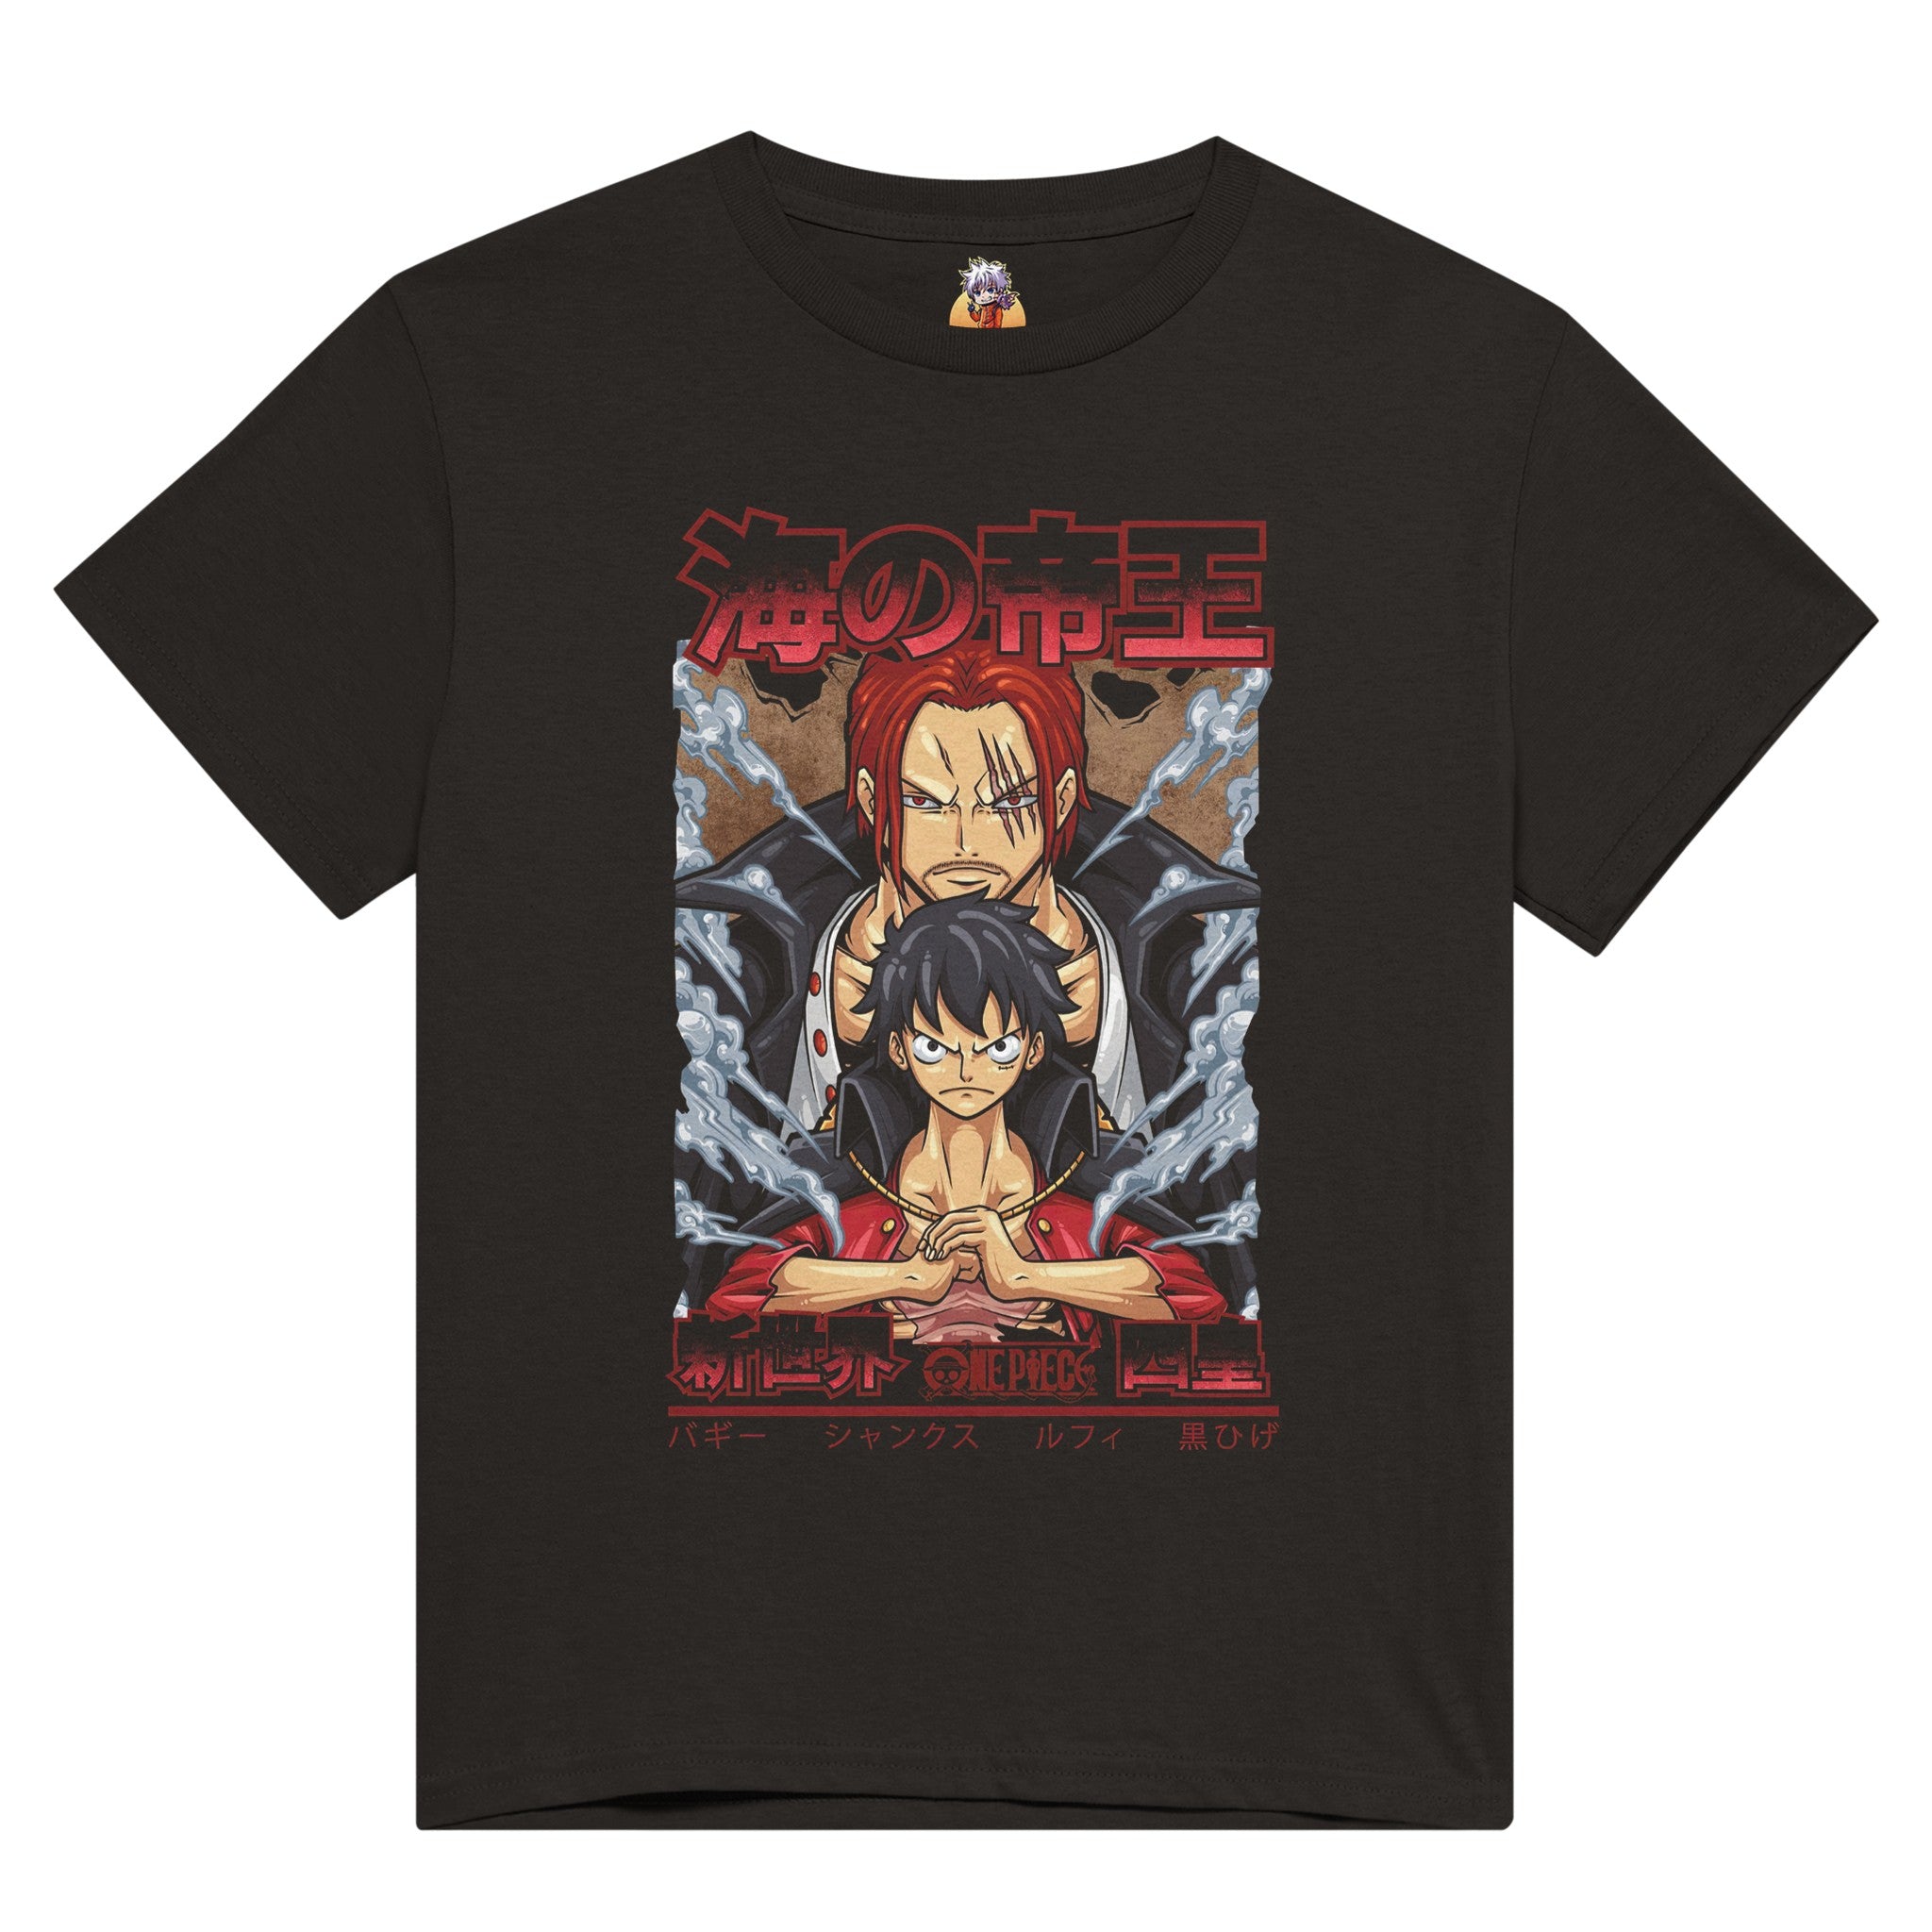 shop and buy One Piece Luffy and Shanks anime clothing t-shirt